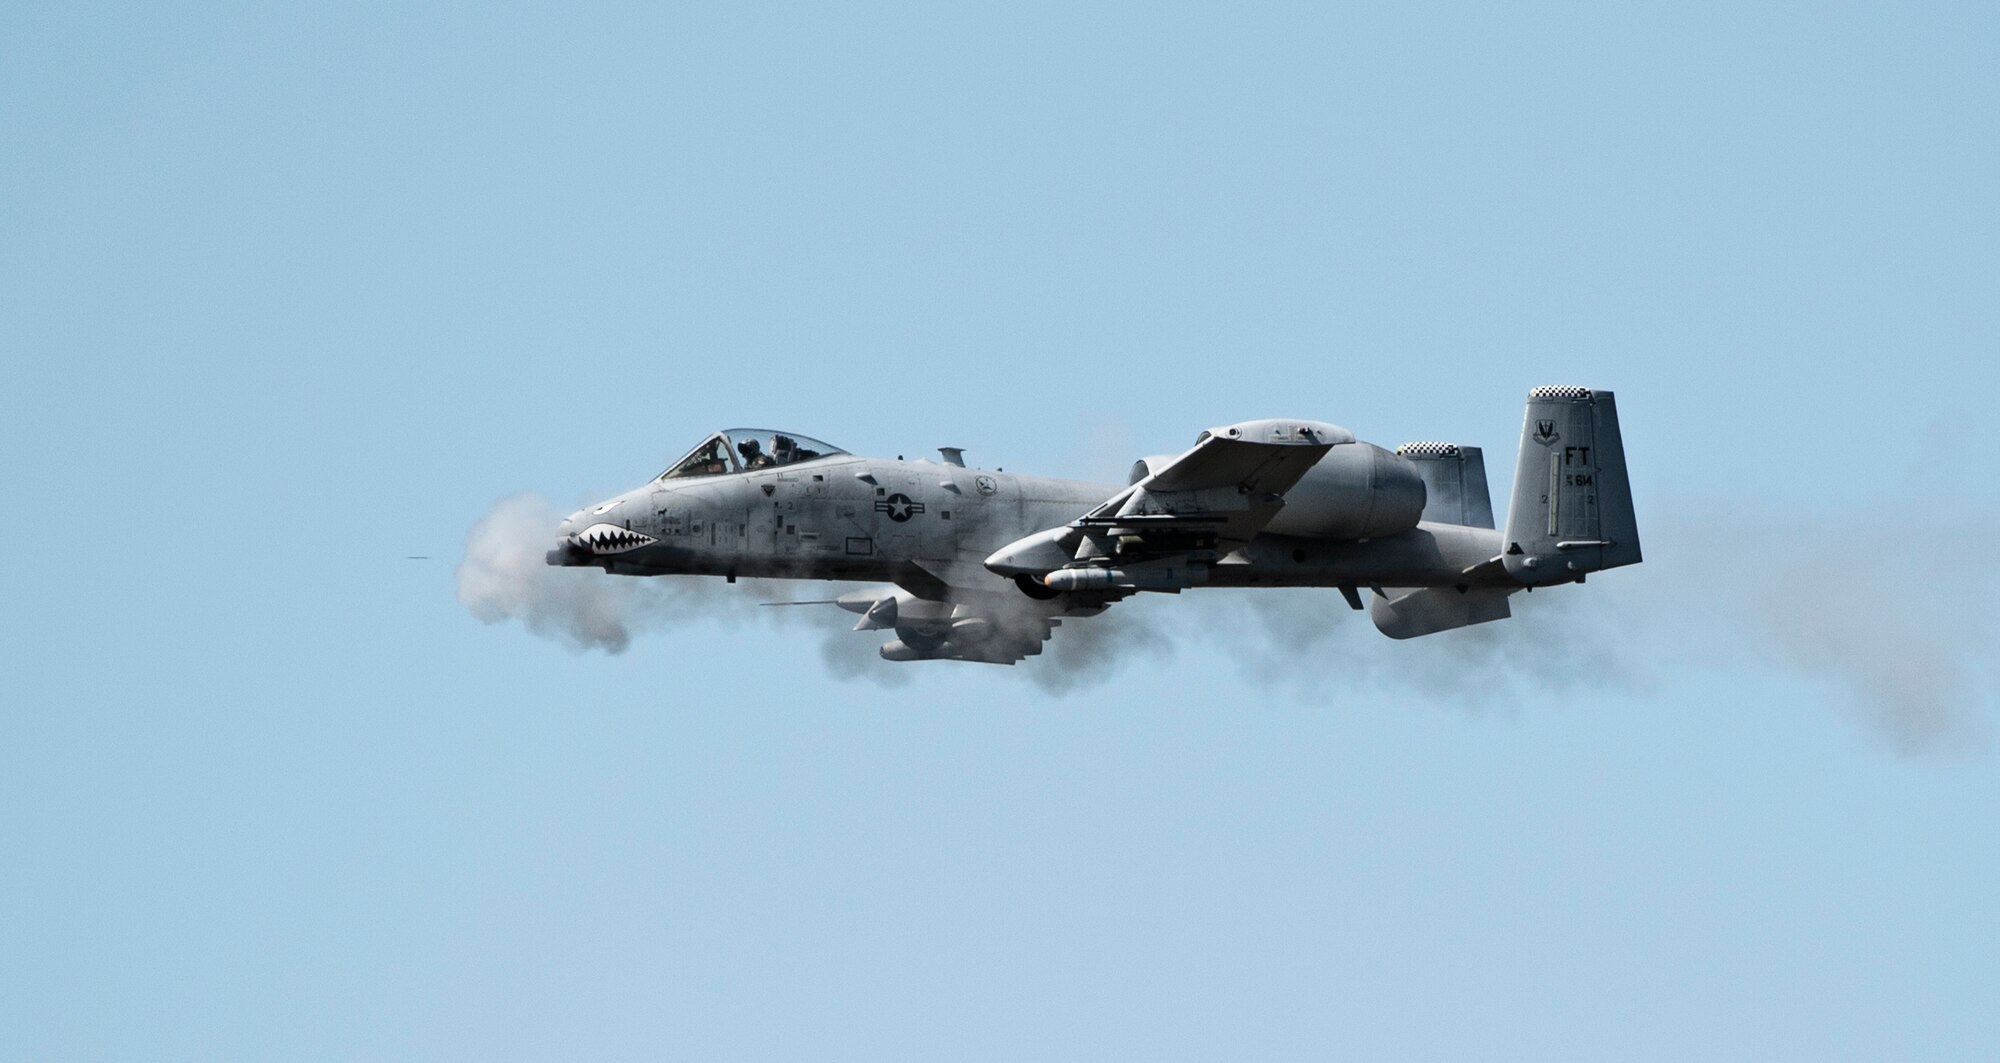 An A-10 Thunderbolt II fires the GAU-8 Avenger, a 30mm Gatling-style canon, over the Grand Bay Bombing and Gunnery Range at Moody Air Force Base, Ga., Feb. 11, 2016. Multiple U.S. Air Force aircraft within Air Combat Command conducted joint aerial training that showcased the aircrafts tactical air and ground maneuvers, as well as its weapons capabilities. (U.S. Air Force photo by Staff Sgt. Brian J. Valencia/Released)